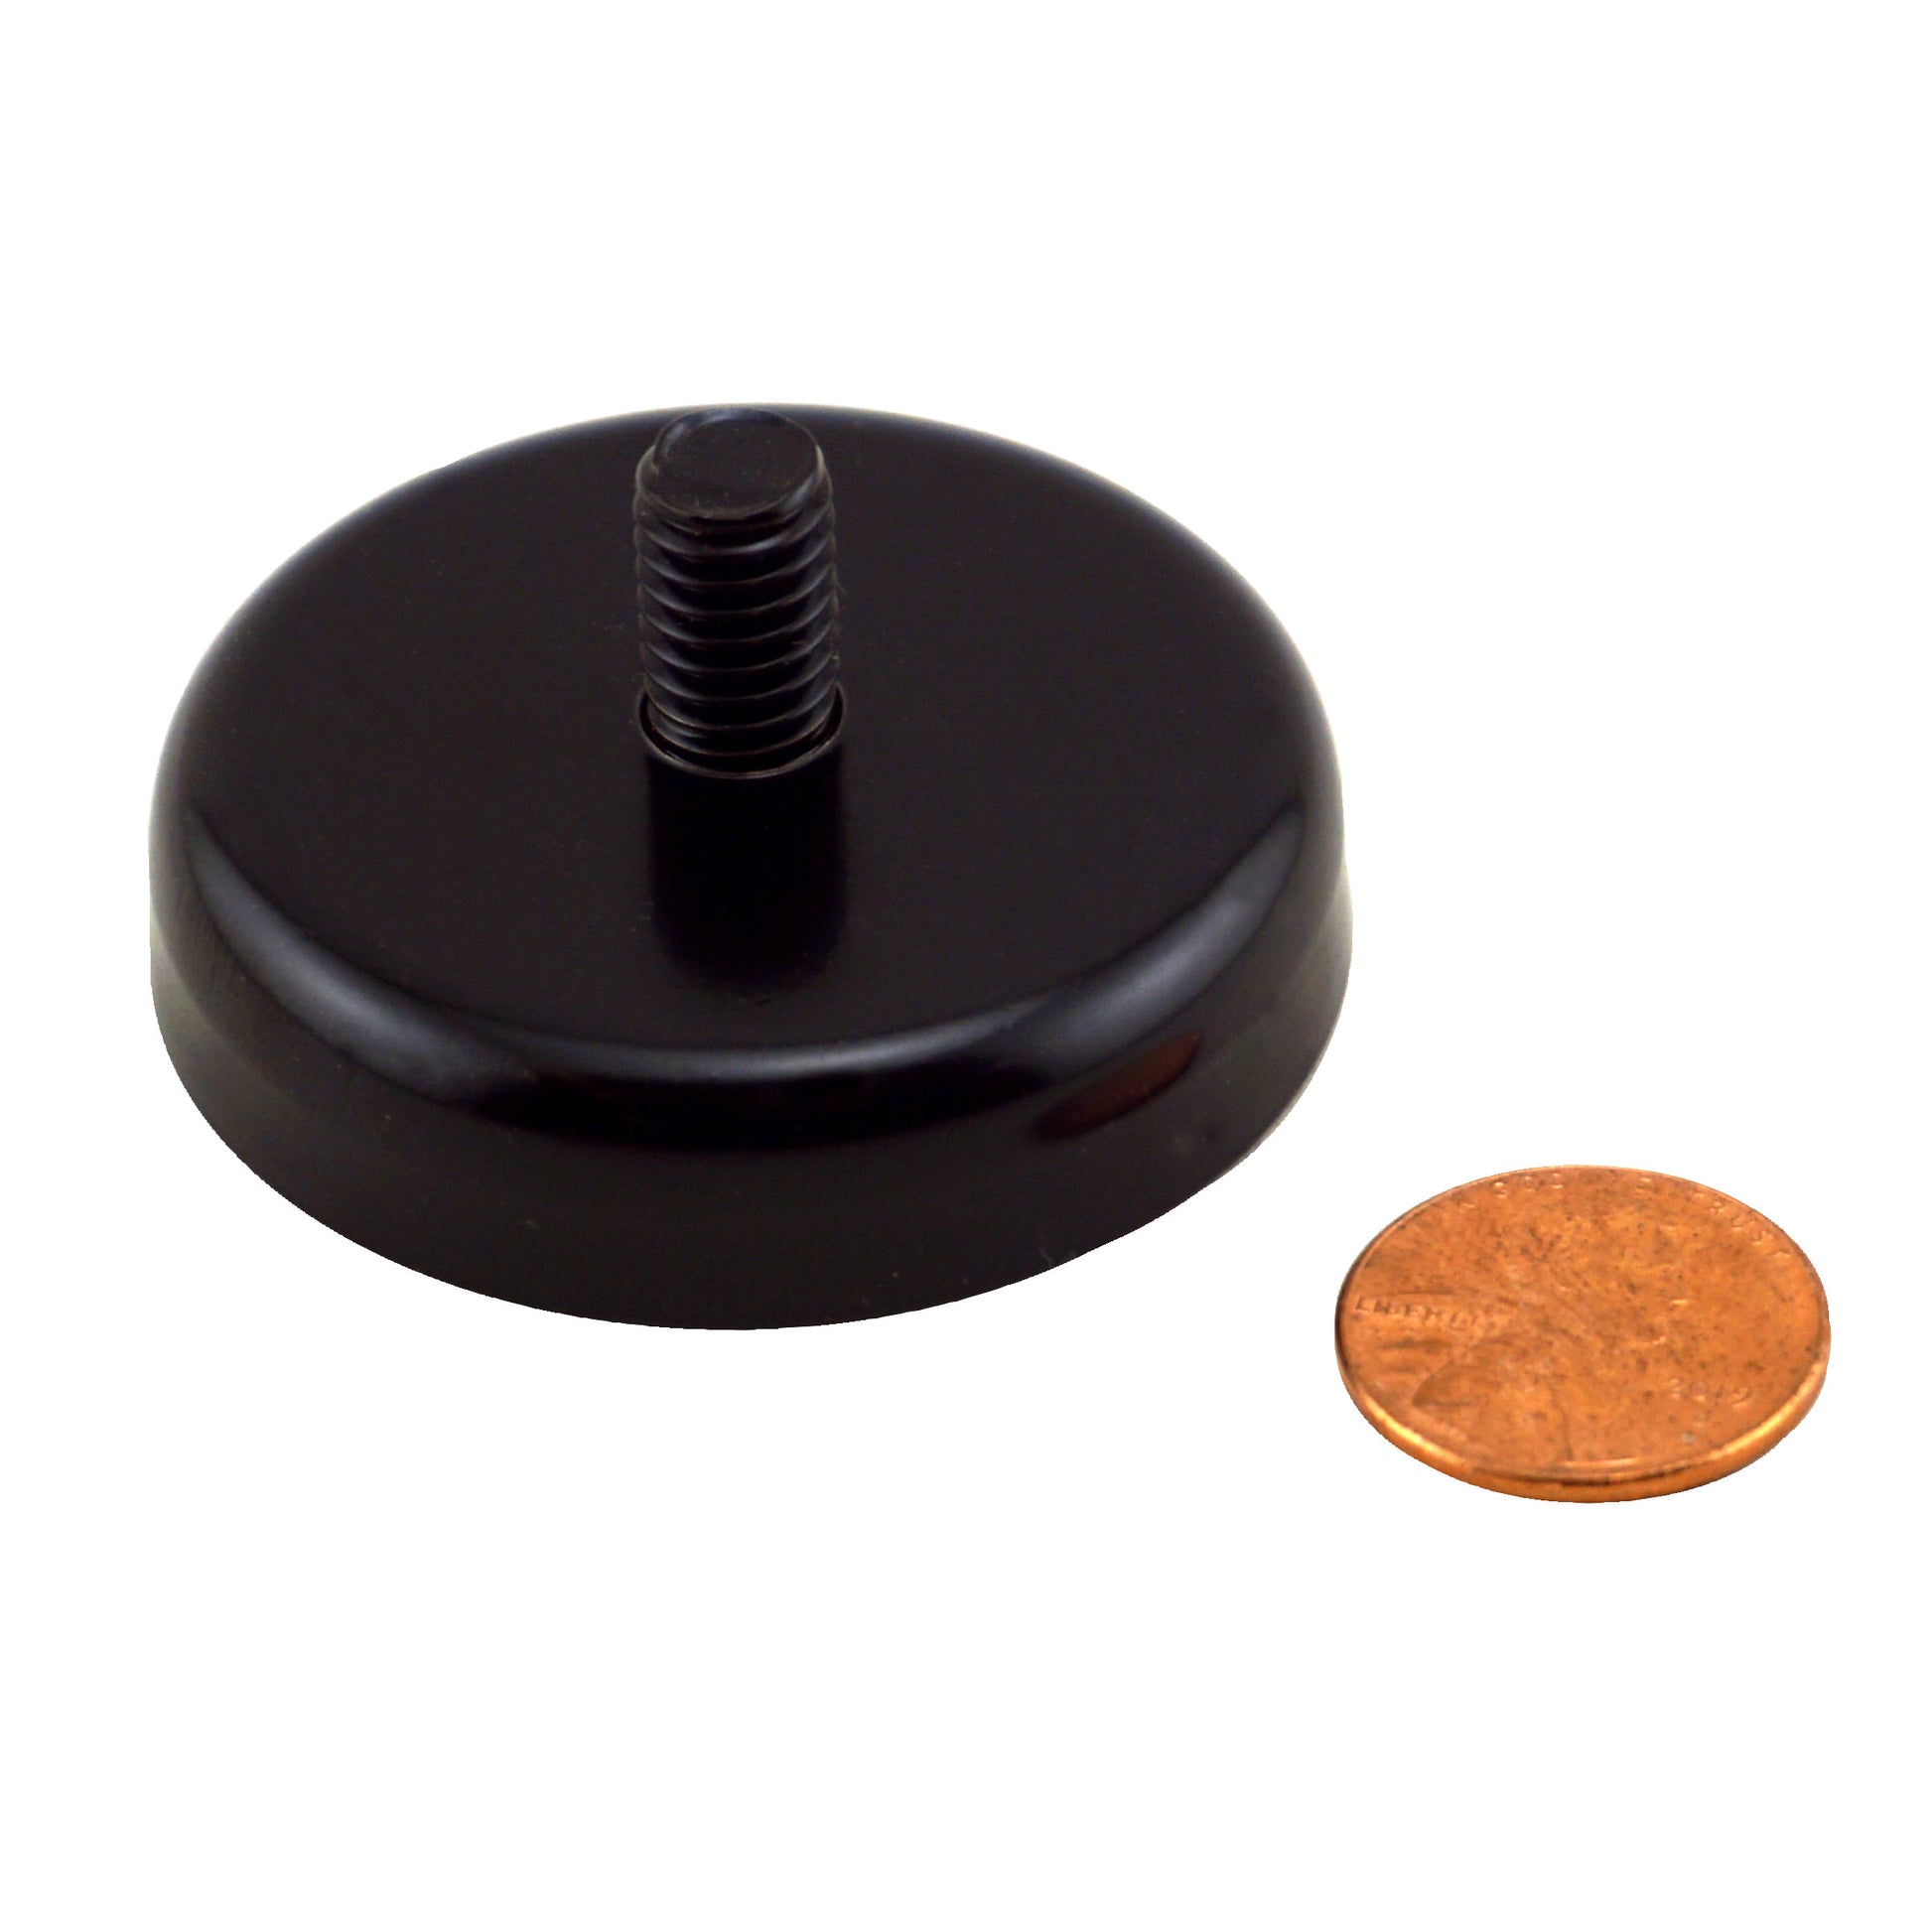 Load image into Gallery viewer, CACM189BPC Ceramic Round Base Magnet with Male Thread - Compared to Penny for Size Reference